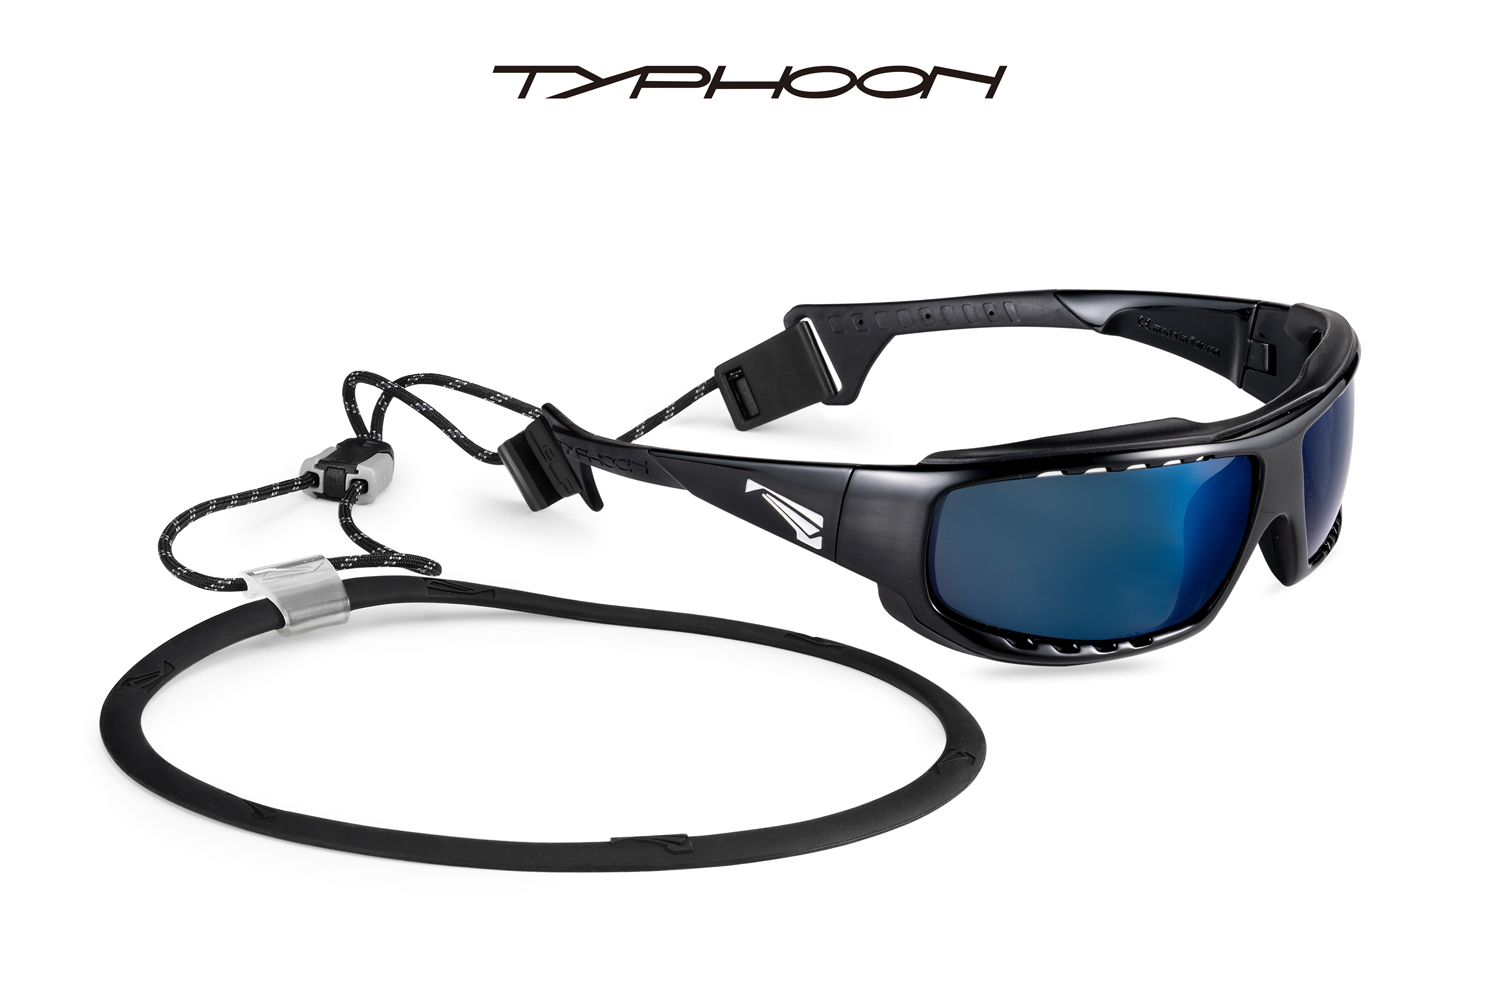 LiP Watersports Sunglasses: We've got your eyes covered